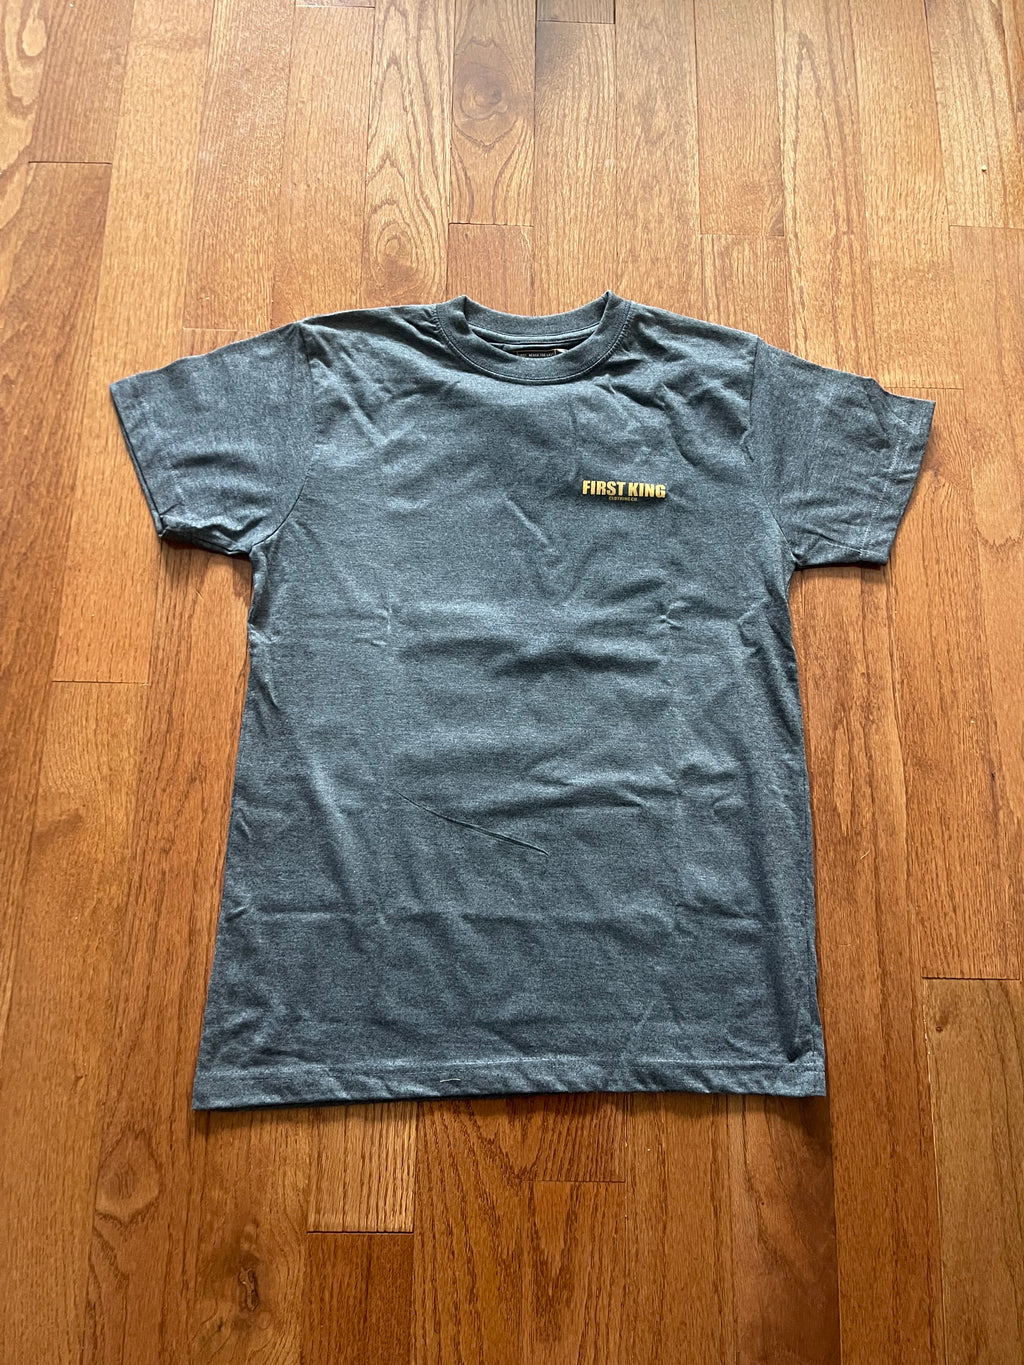 First King Clothing Charcoal Grey